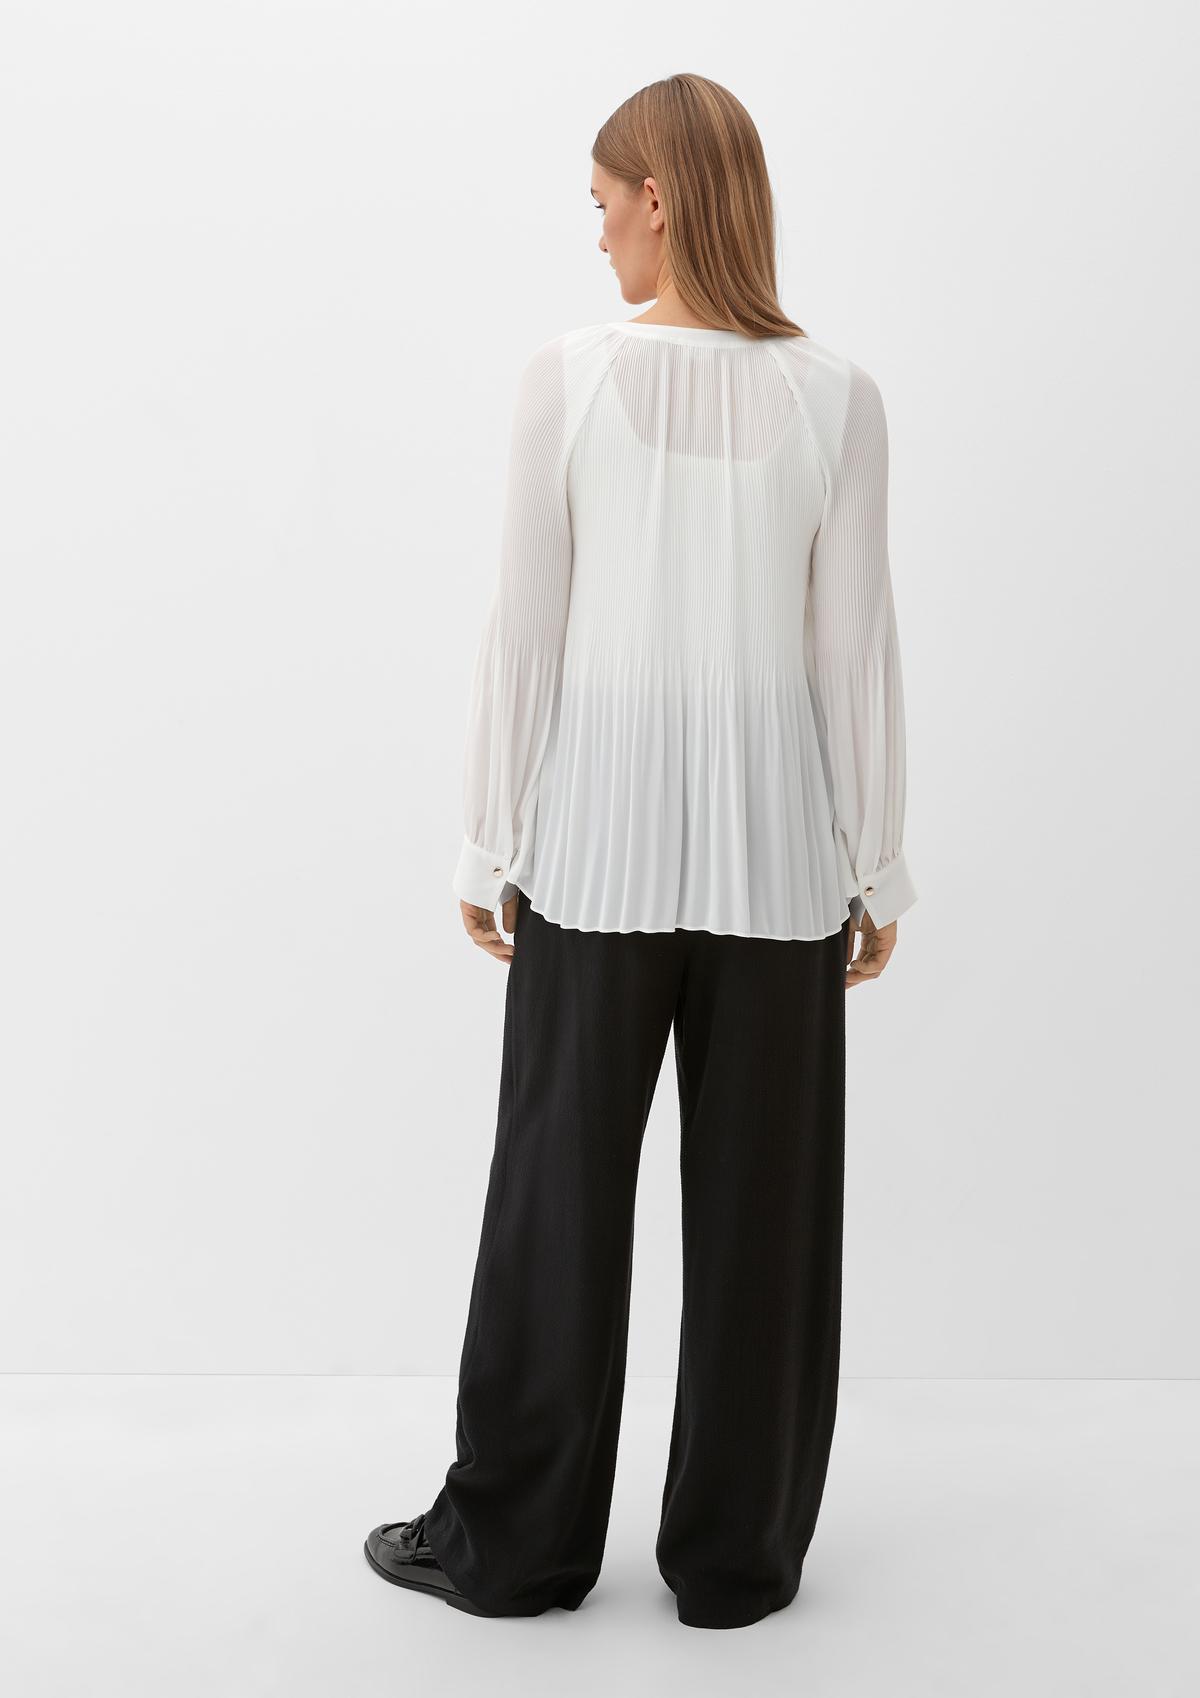 s.Oliver Blouse with a pleated texture